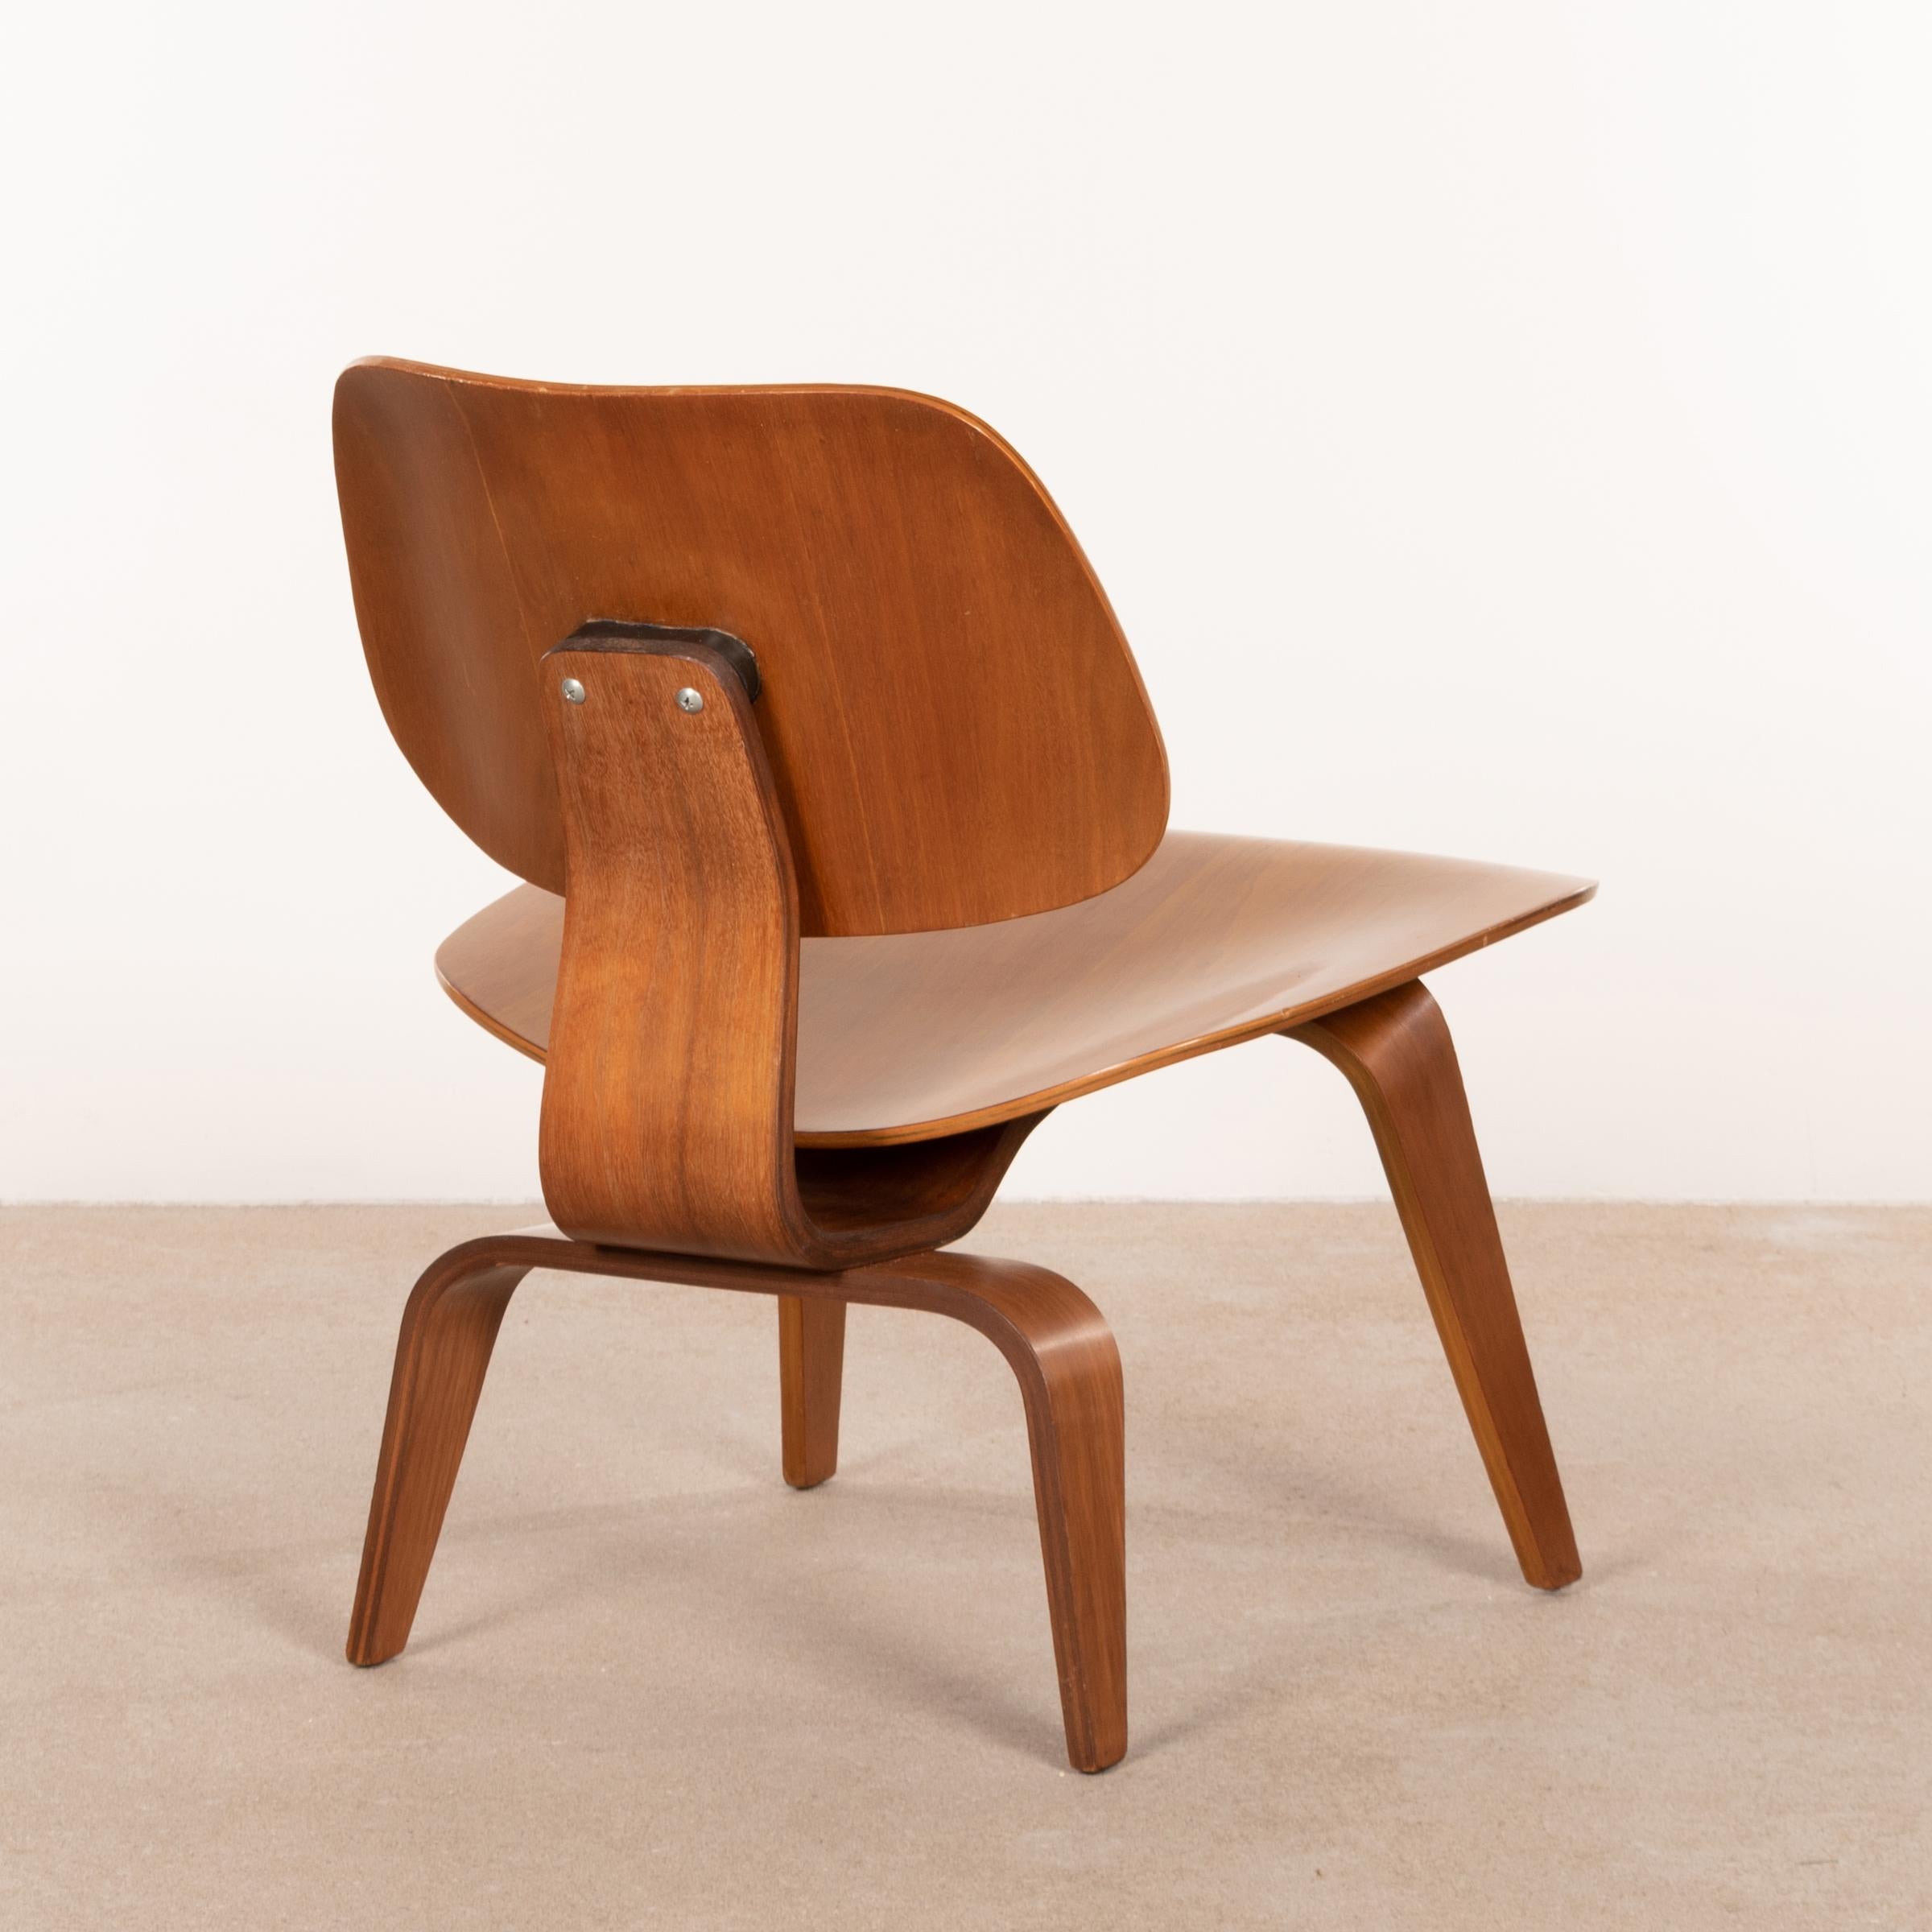 American Charles & Ray Eames Early LCW Walnut Lounge Chair for Herman Miller, 1951